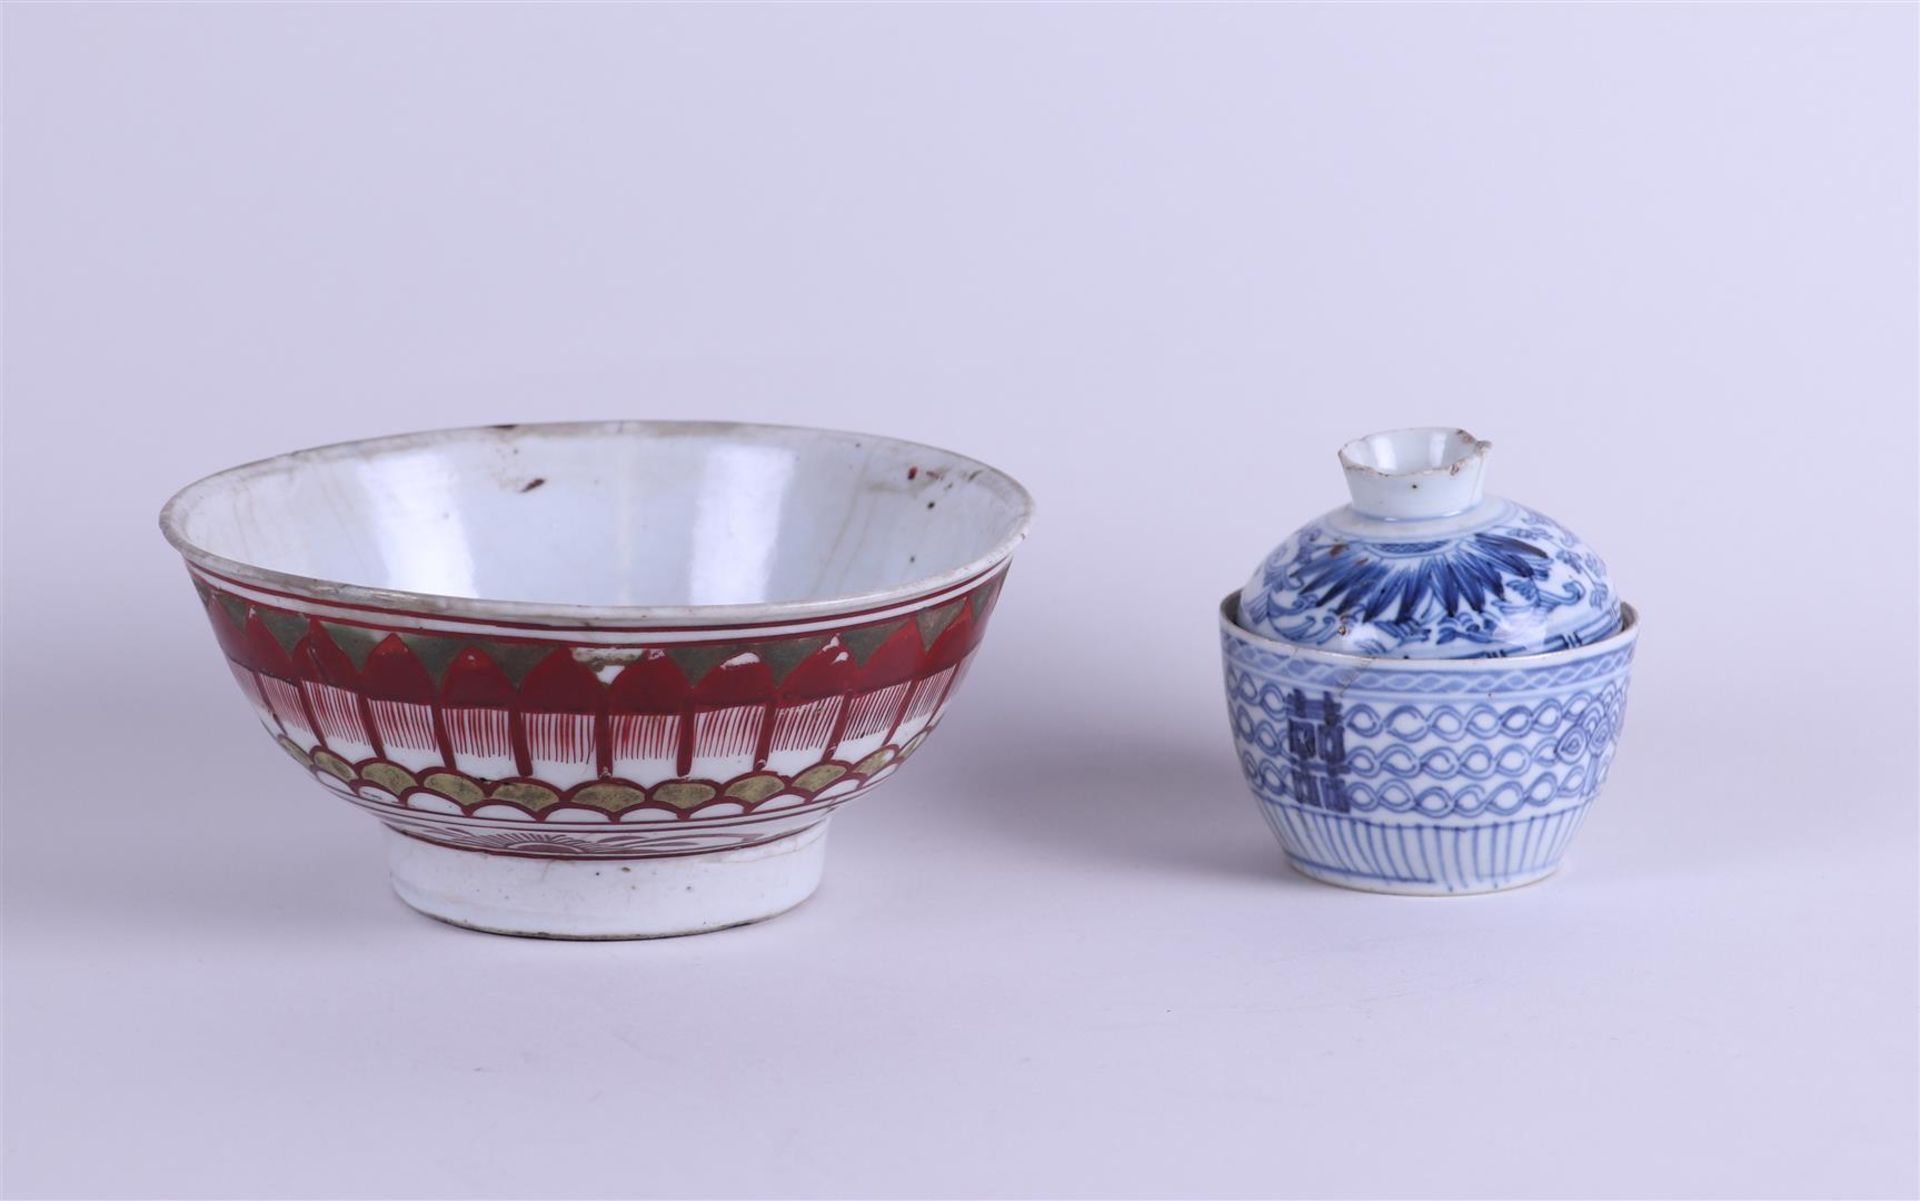 A porcelain bowl with floral decor, with a blue and white lidded bowl. China, 19th century.